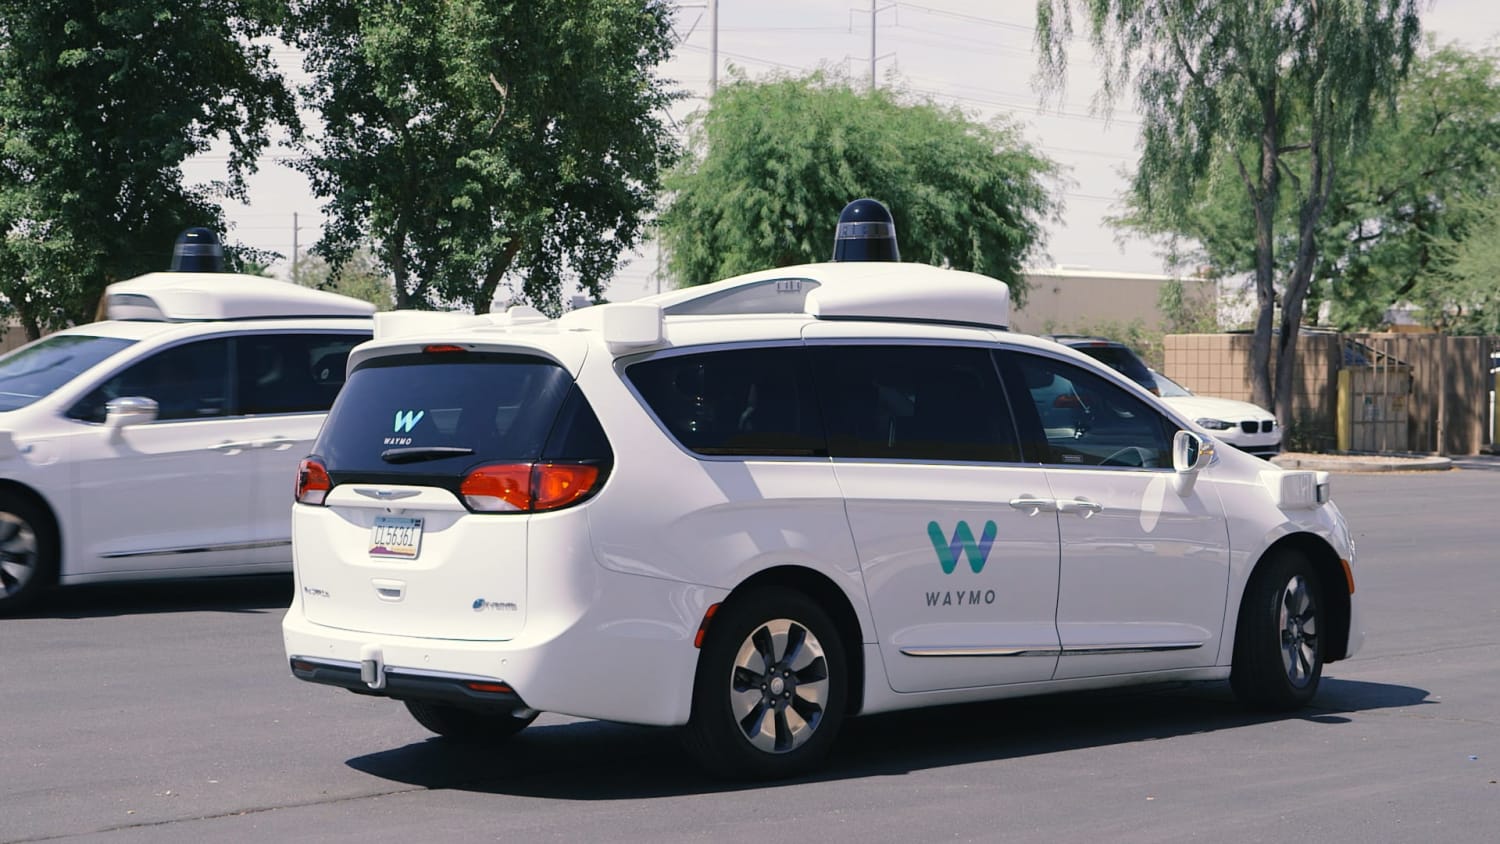 Alphabet's self-driving car company Waymo raises a whopping $2.25 billion in first external funding round